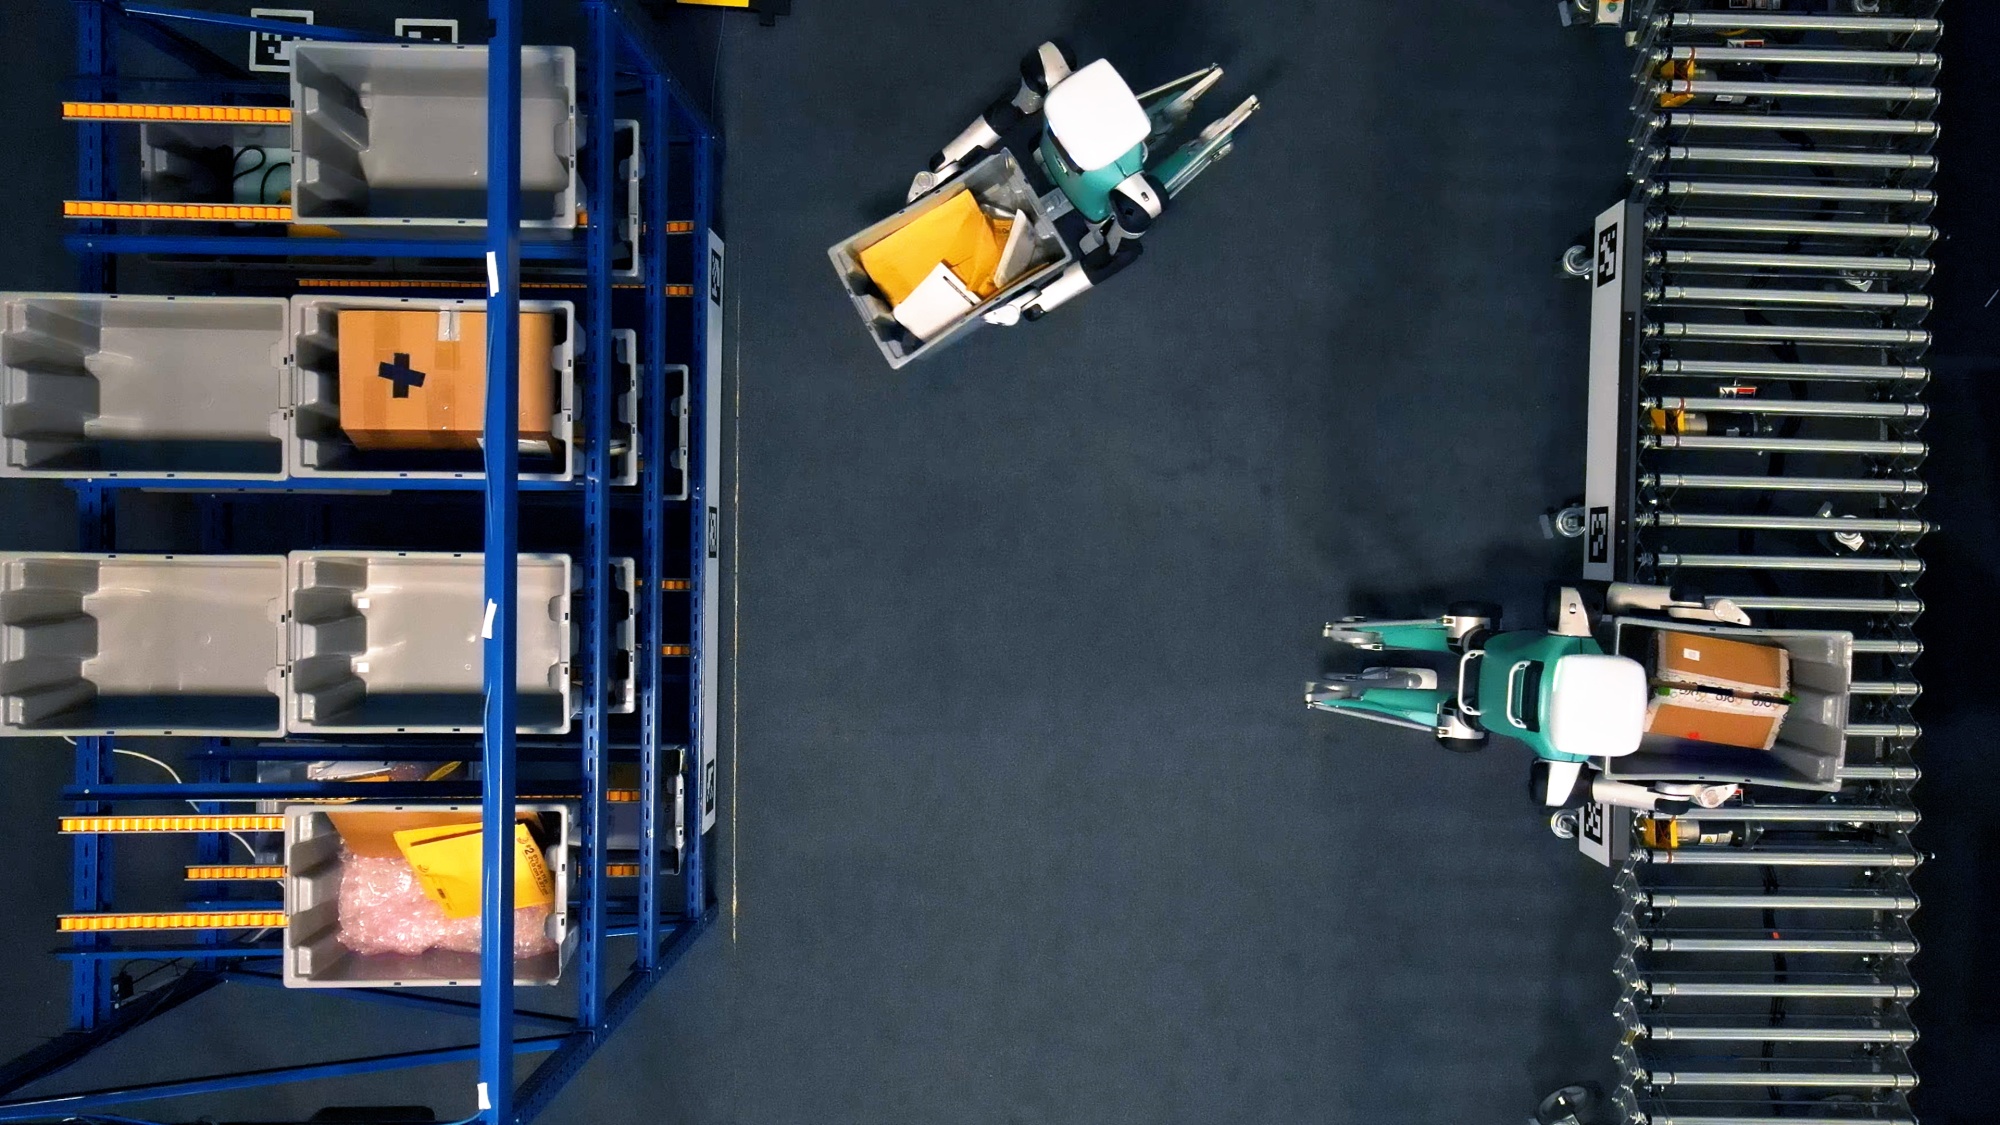 Humanoid robots are now working side by side humans in warehouses